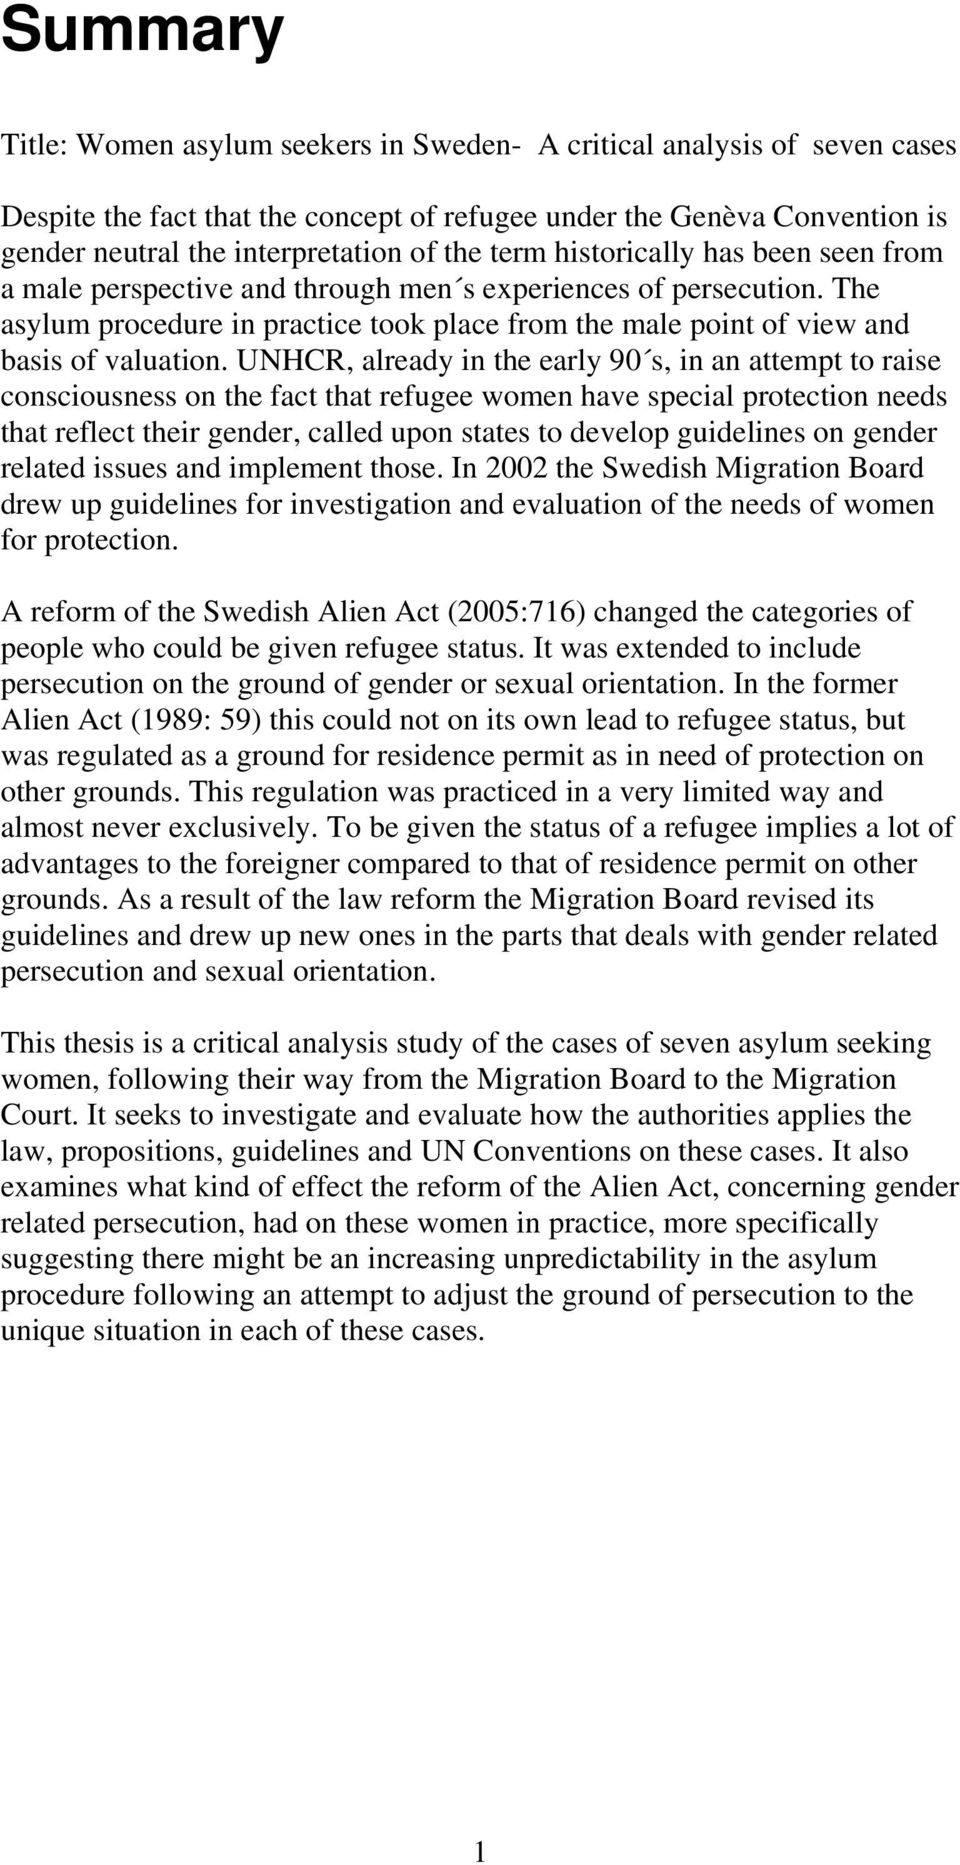 UNHCR, already in the early 90 s, in an attempt to raise consciousness on the fact that refugee women have special protection needs that reflect their gender, called upon states to develop guidelines